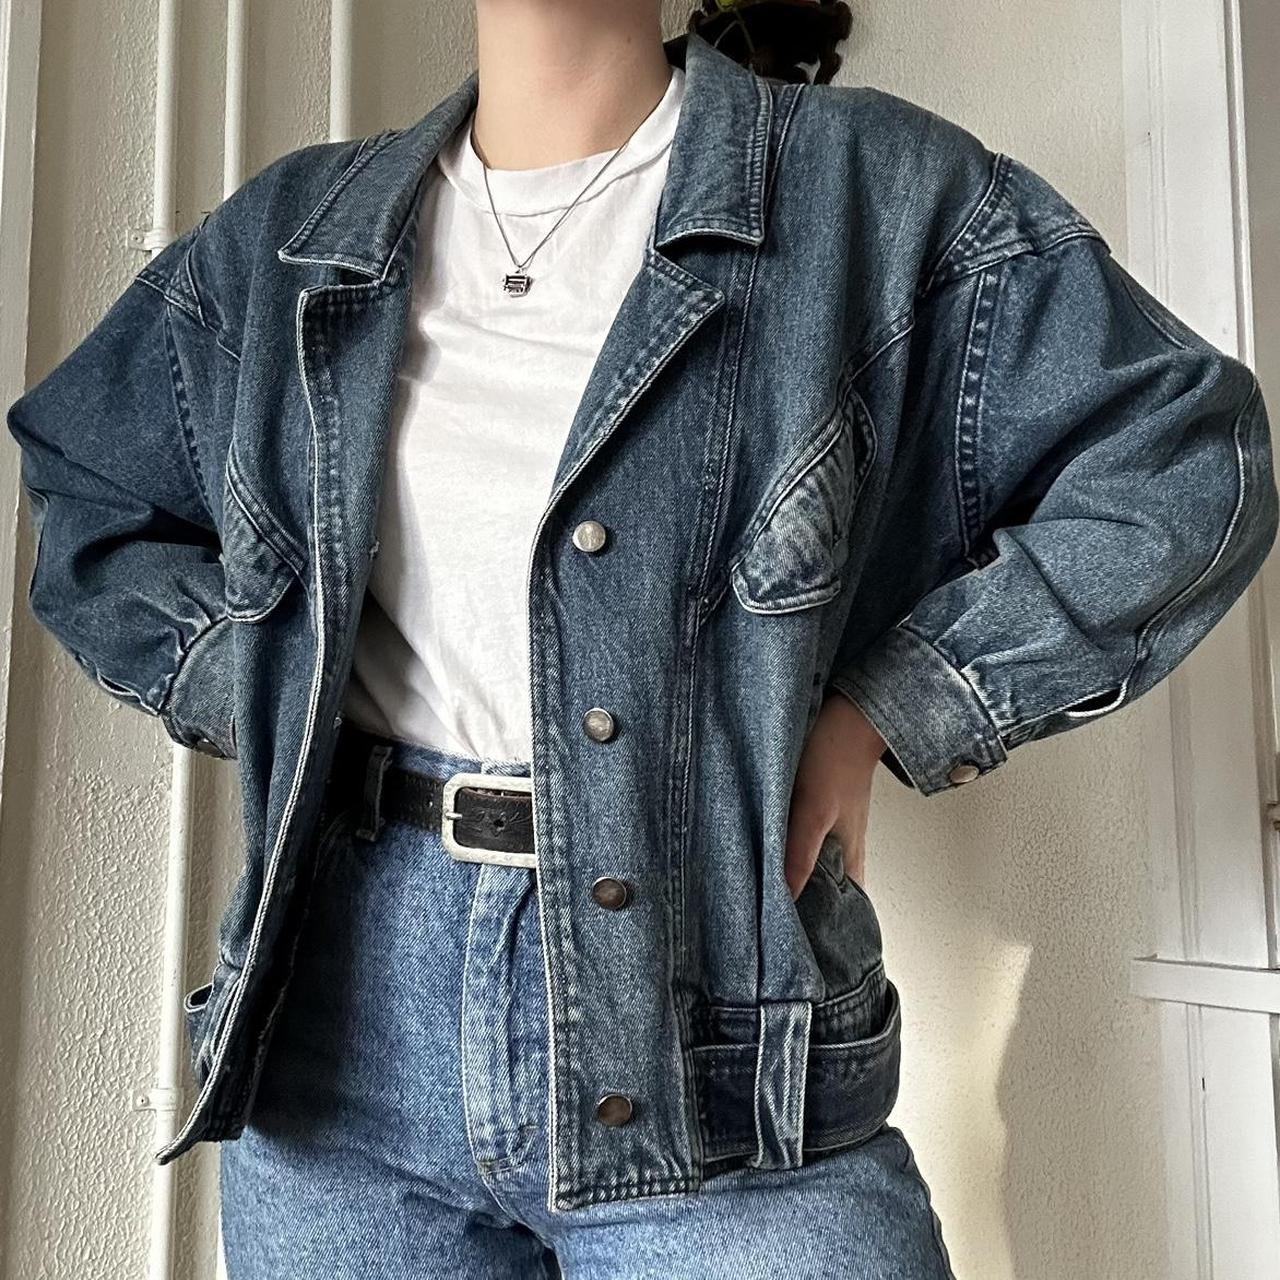 American Vintage Women's Navy and Blue Jacket